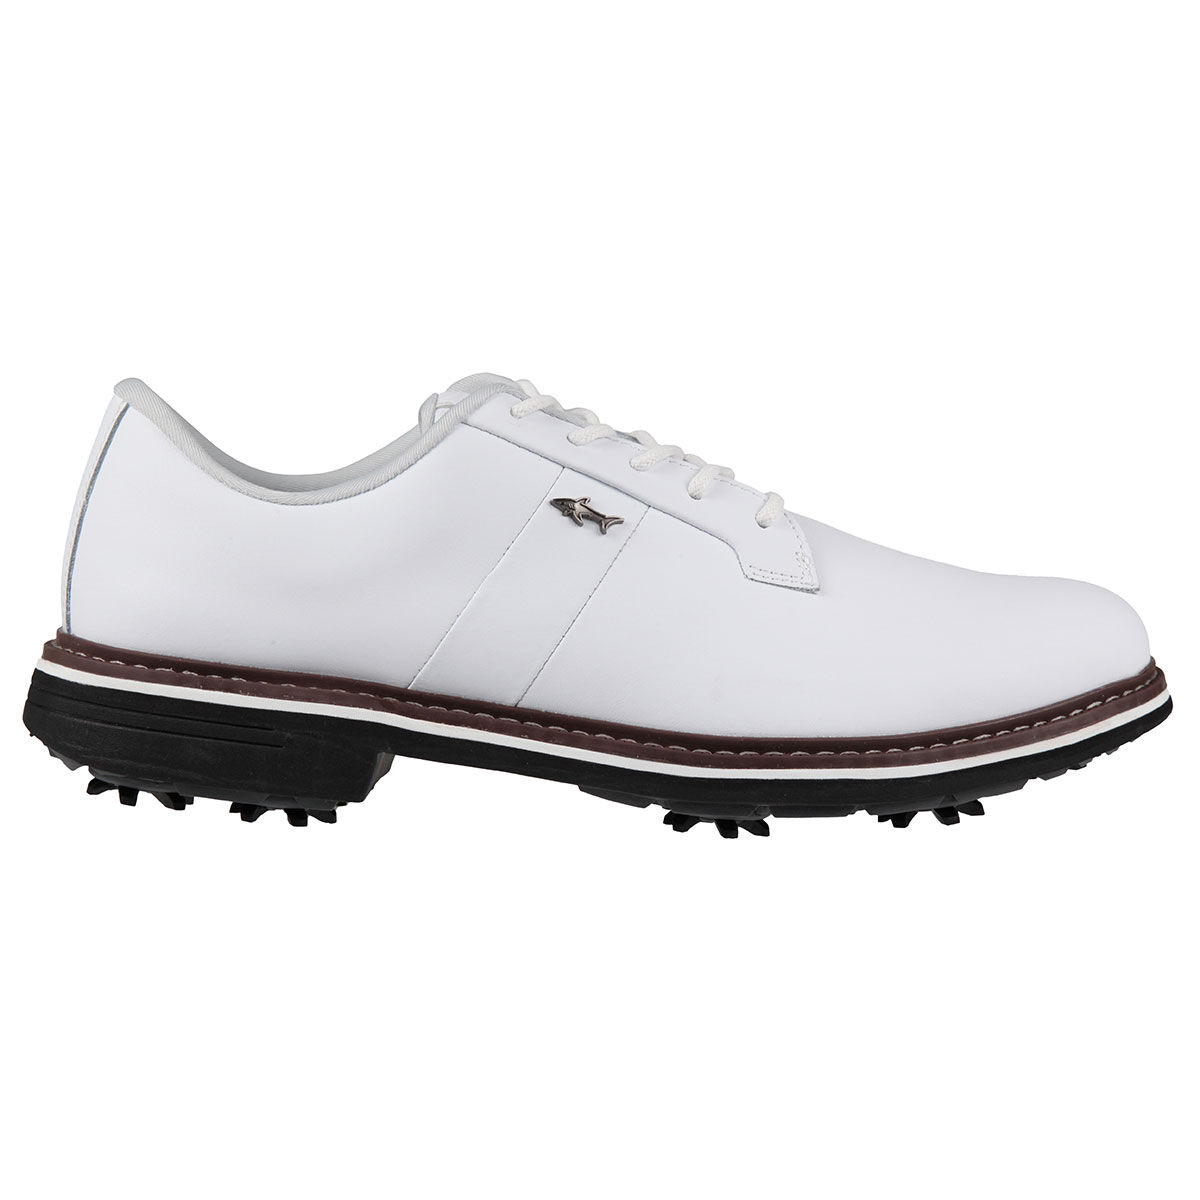 Greg Norman Men's Isa Tour 2 Waterproof Spiked Golf Shoes, Mens, White, 7 | American Golf - Father's Day Gift von Greg Norman